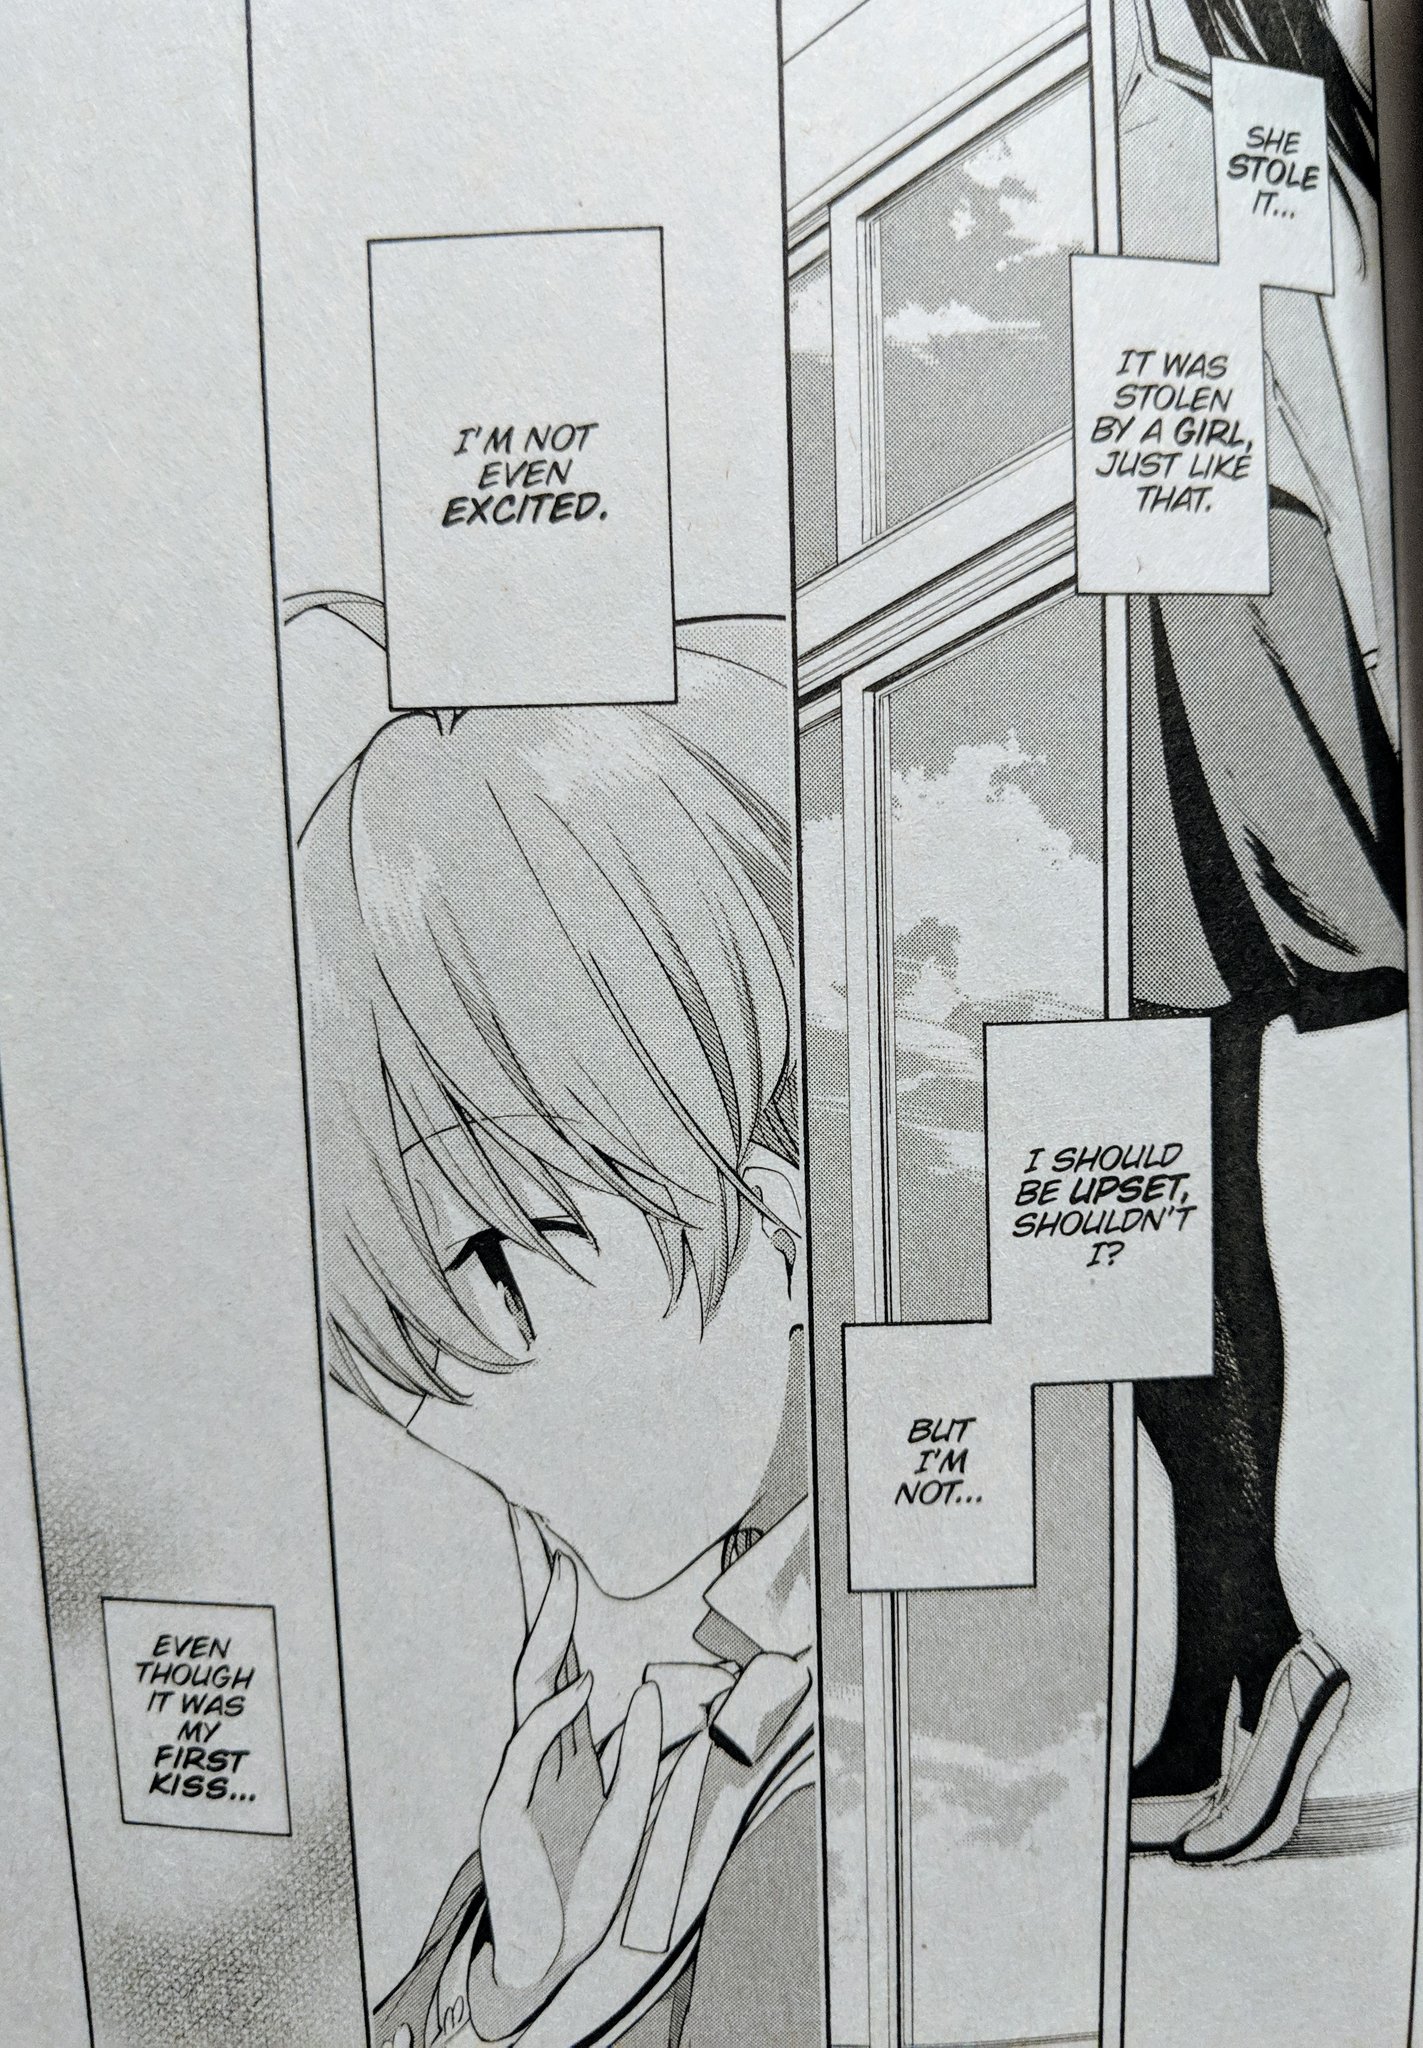 Page from Bloom Into You. Yuu contemplates her first kiss. “I’m not even excited,” she thinks.